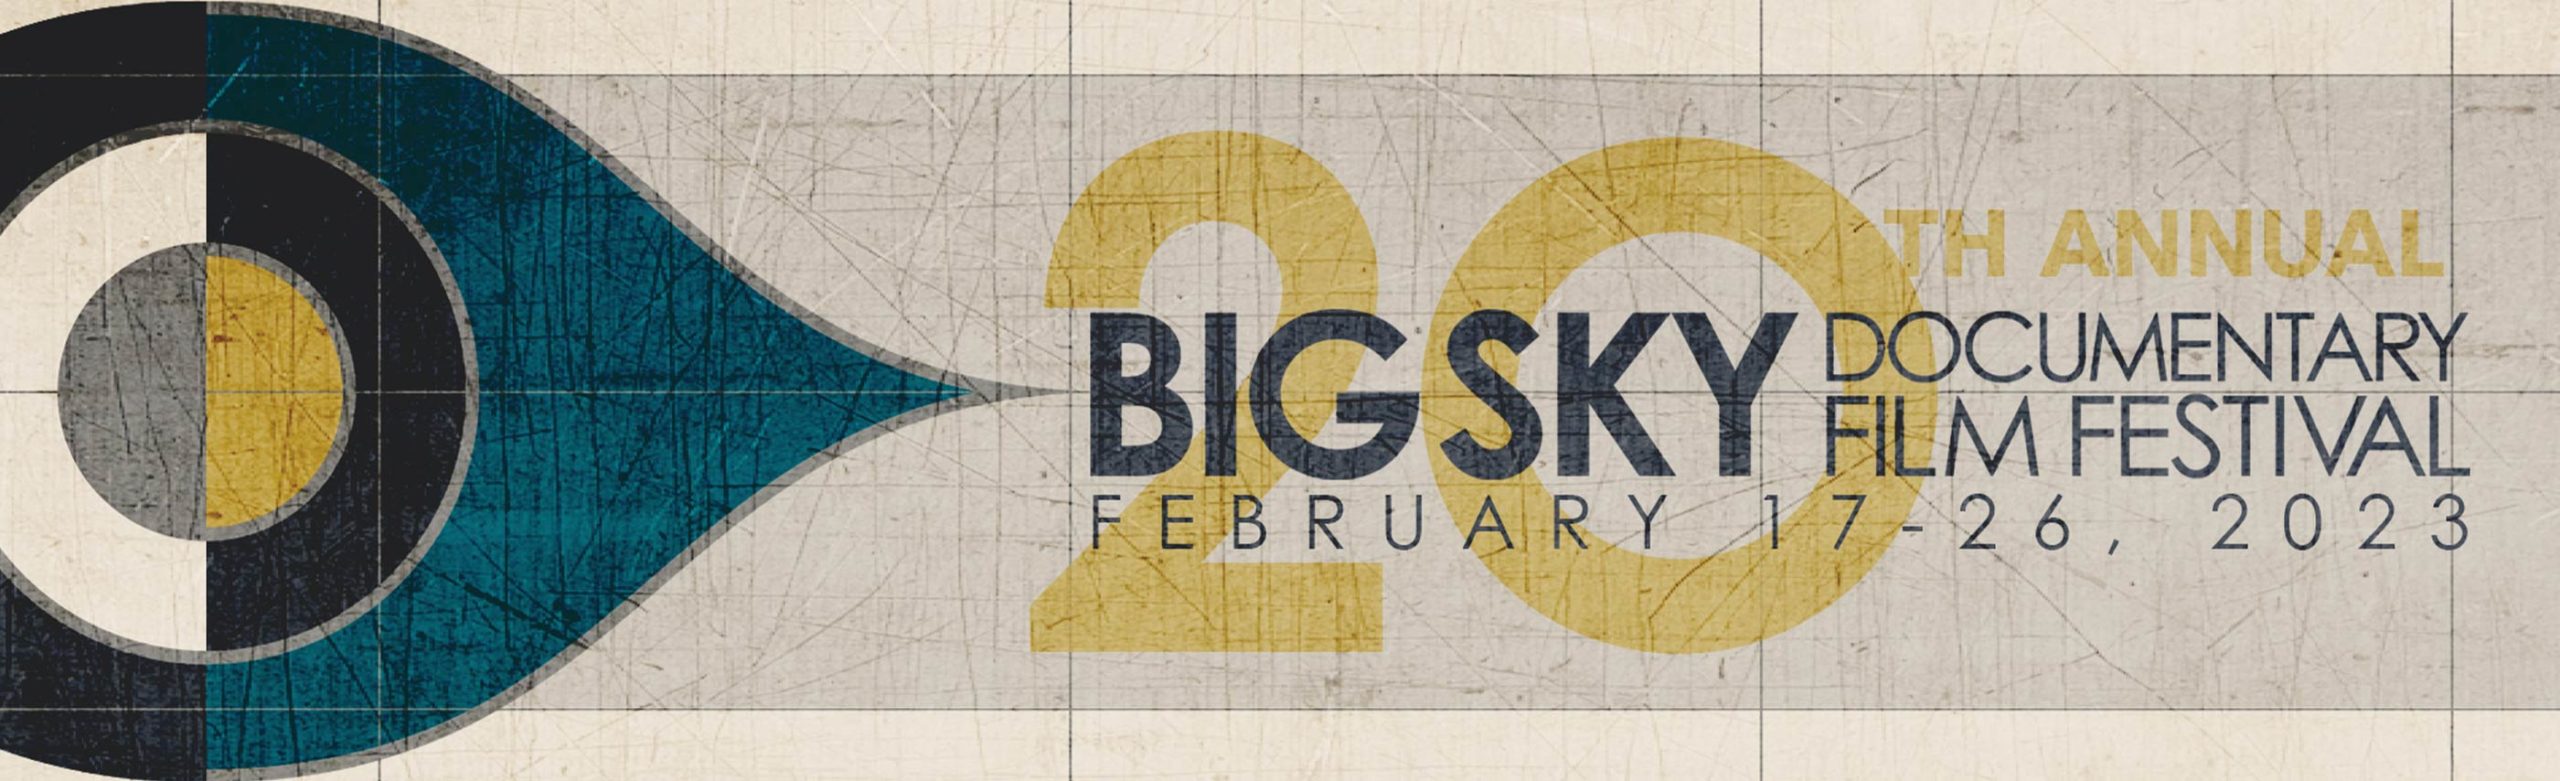 Event Info: 20th Annual Big Sky Documentary Festival at The Wilma Image